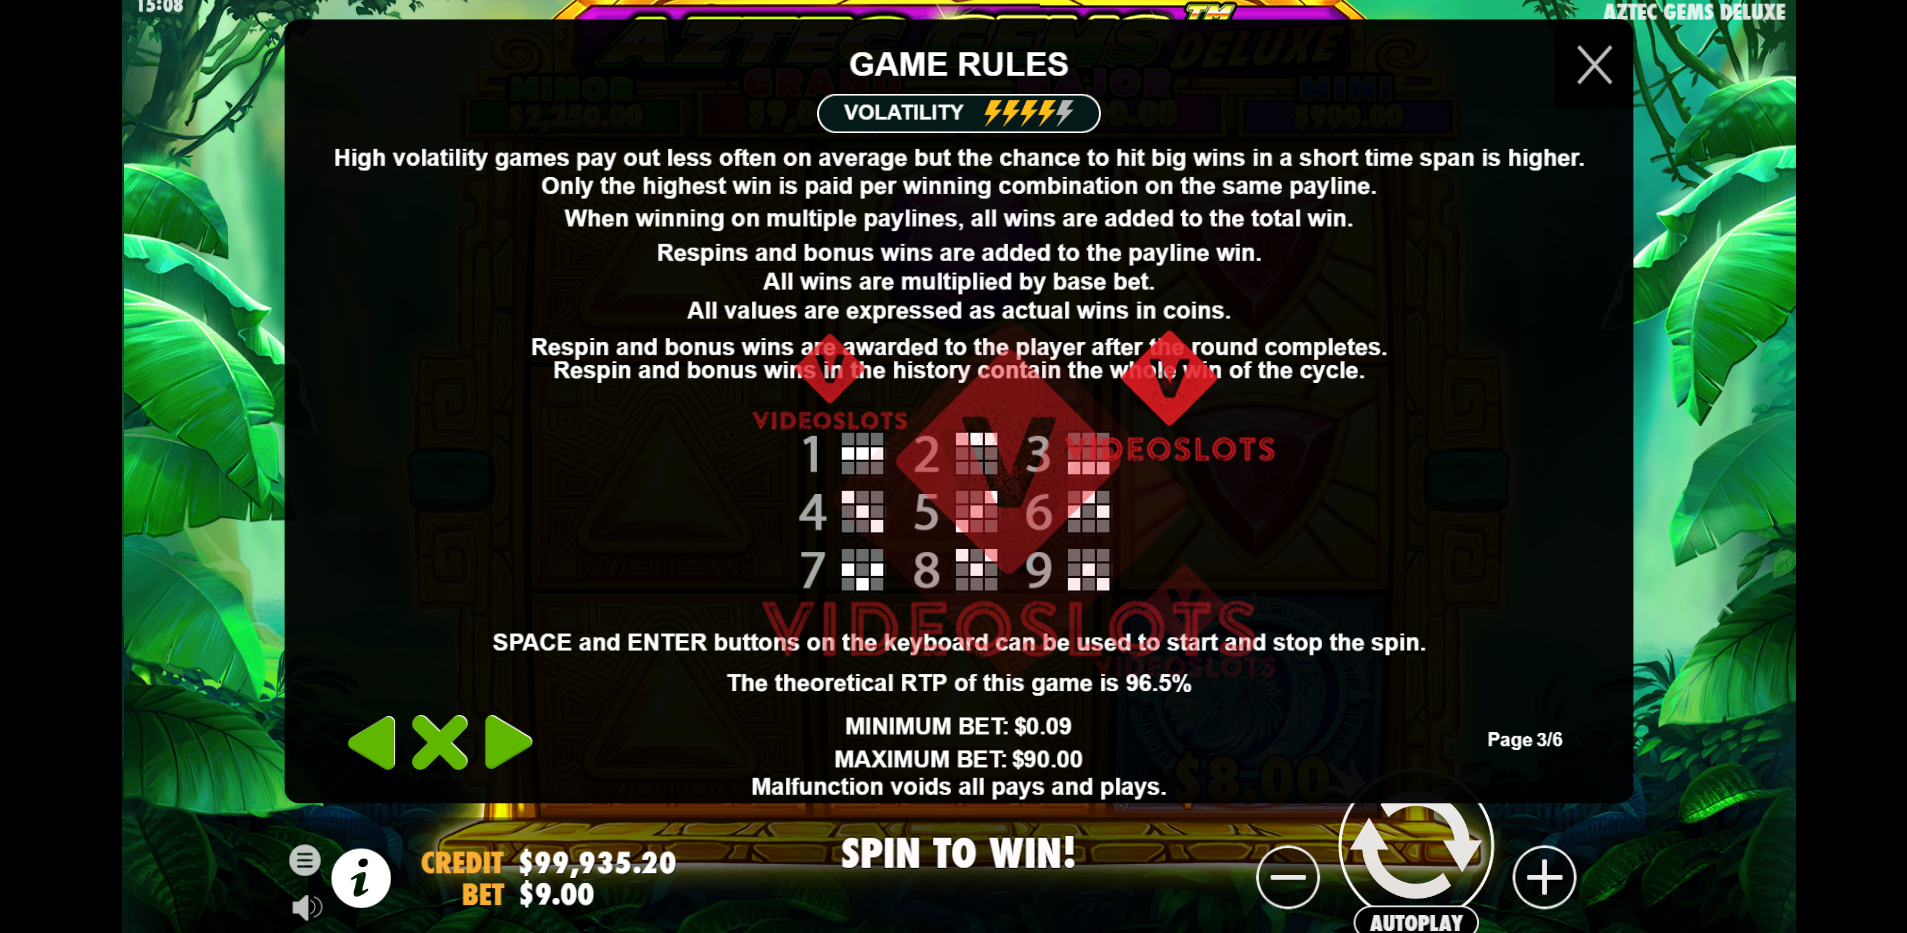 Game Rules for Aztec Gems Deluxe slot by Pragmatic Play